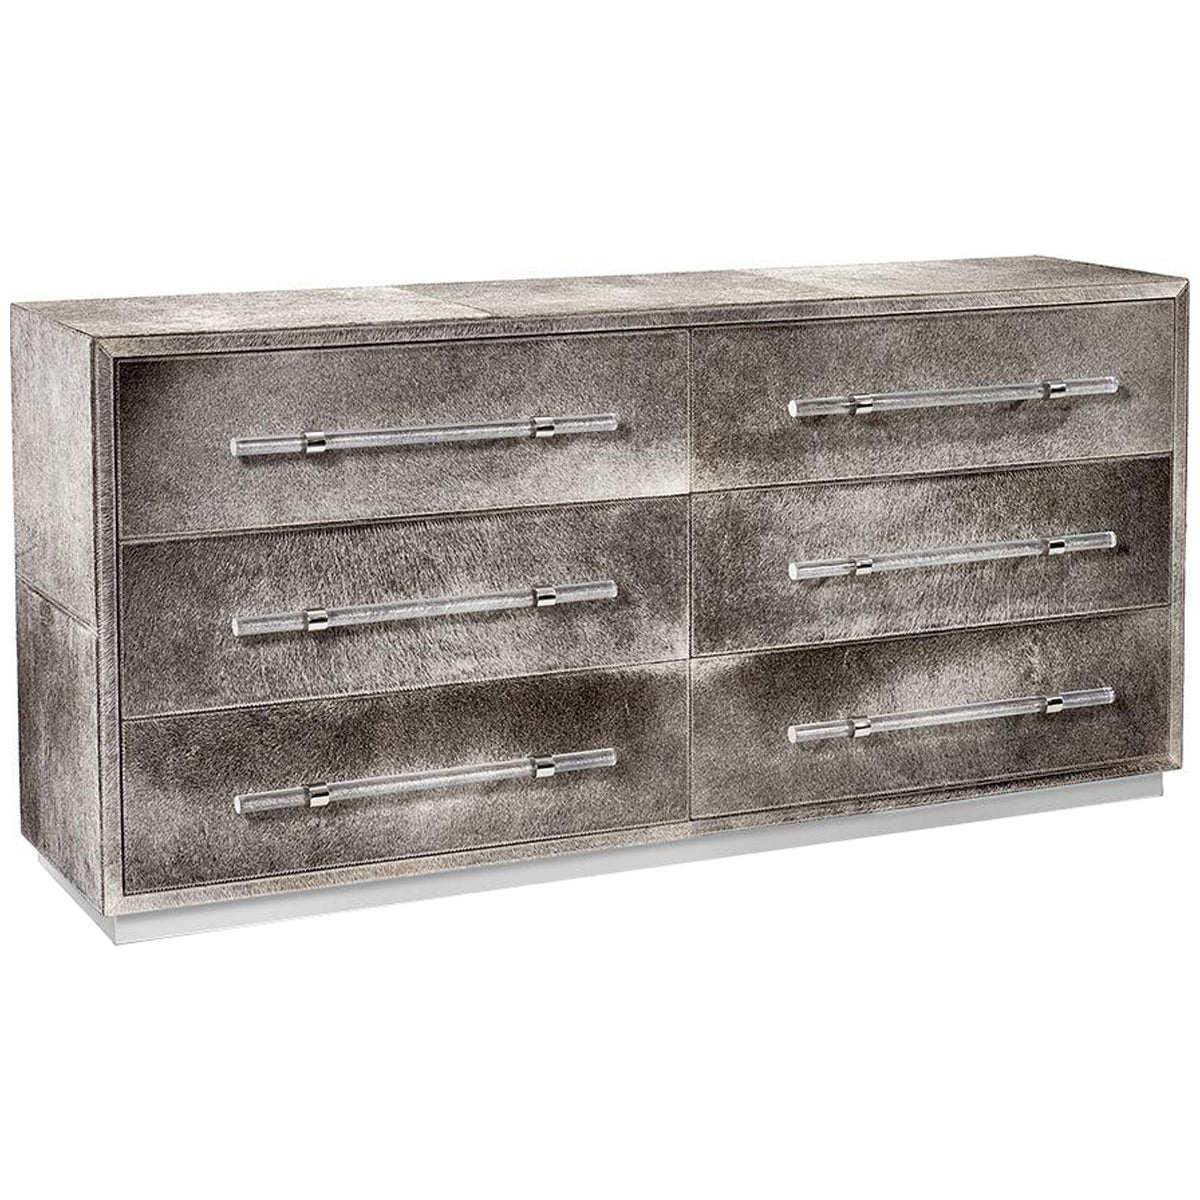 Interlude Home Cassian 6-Drawer Chest